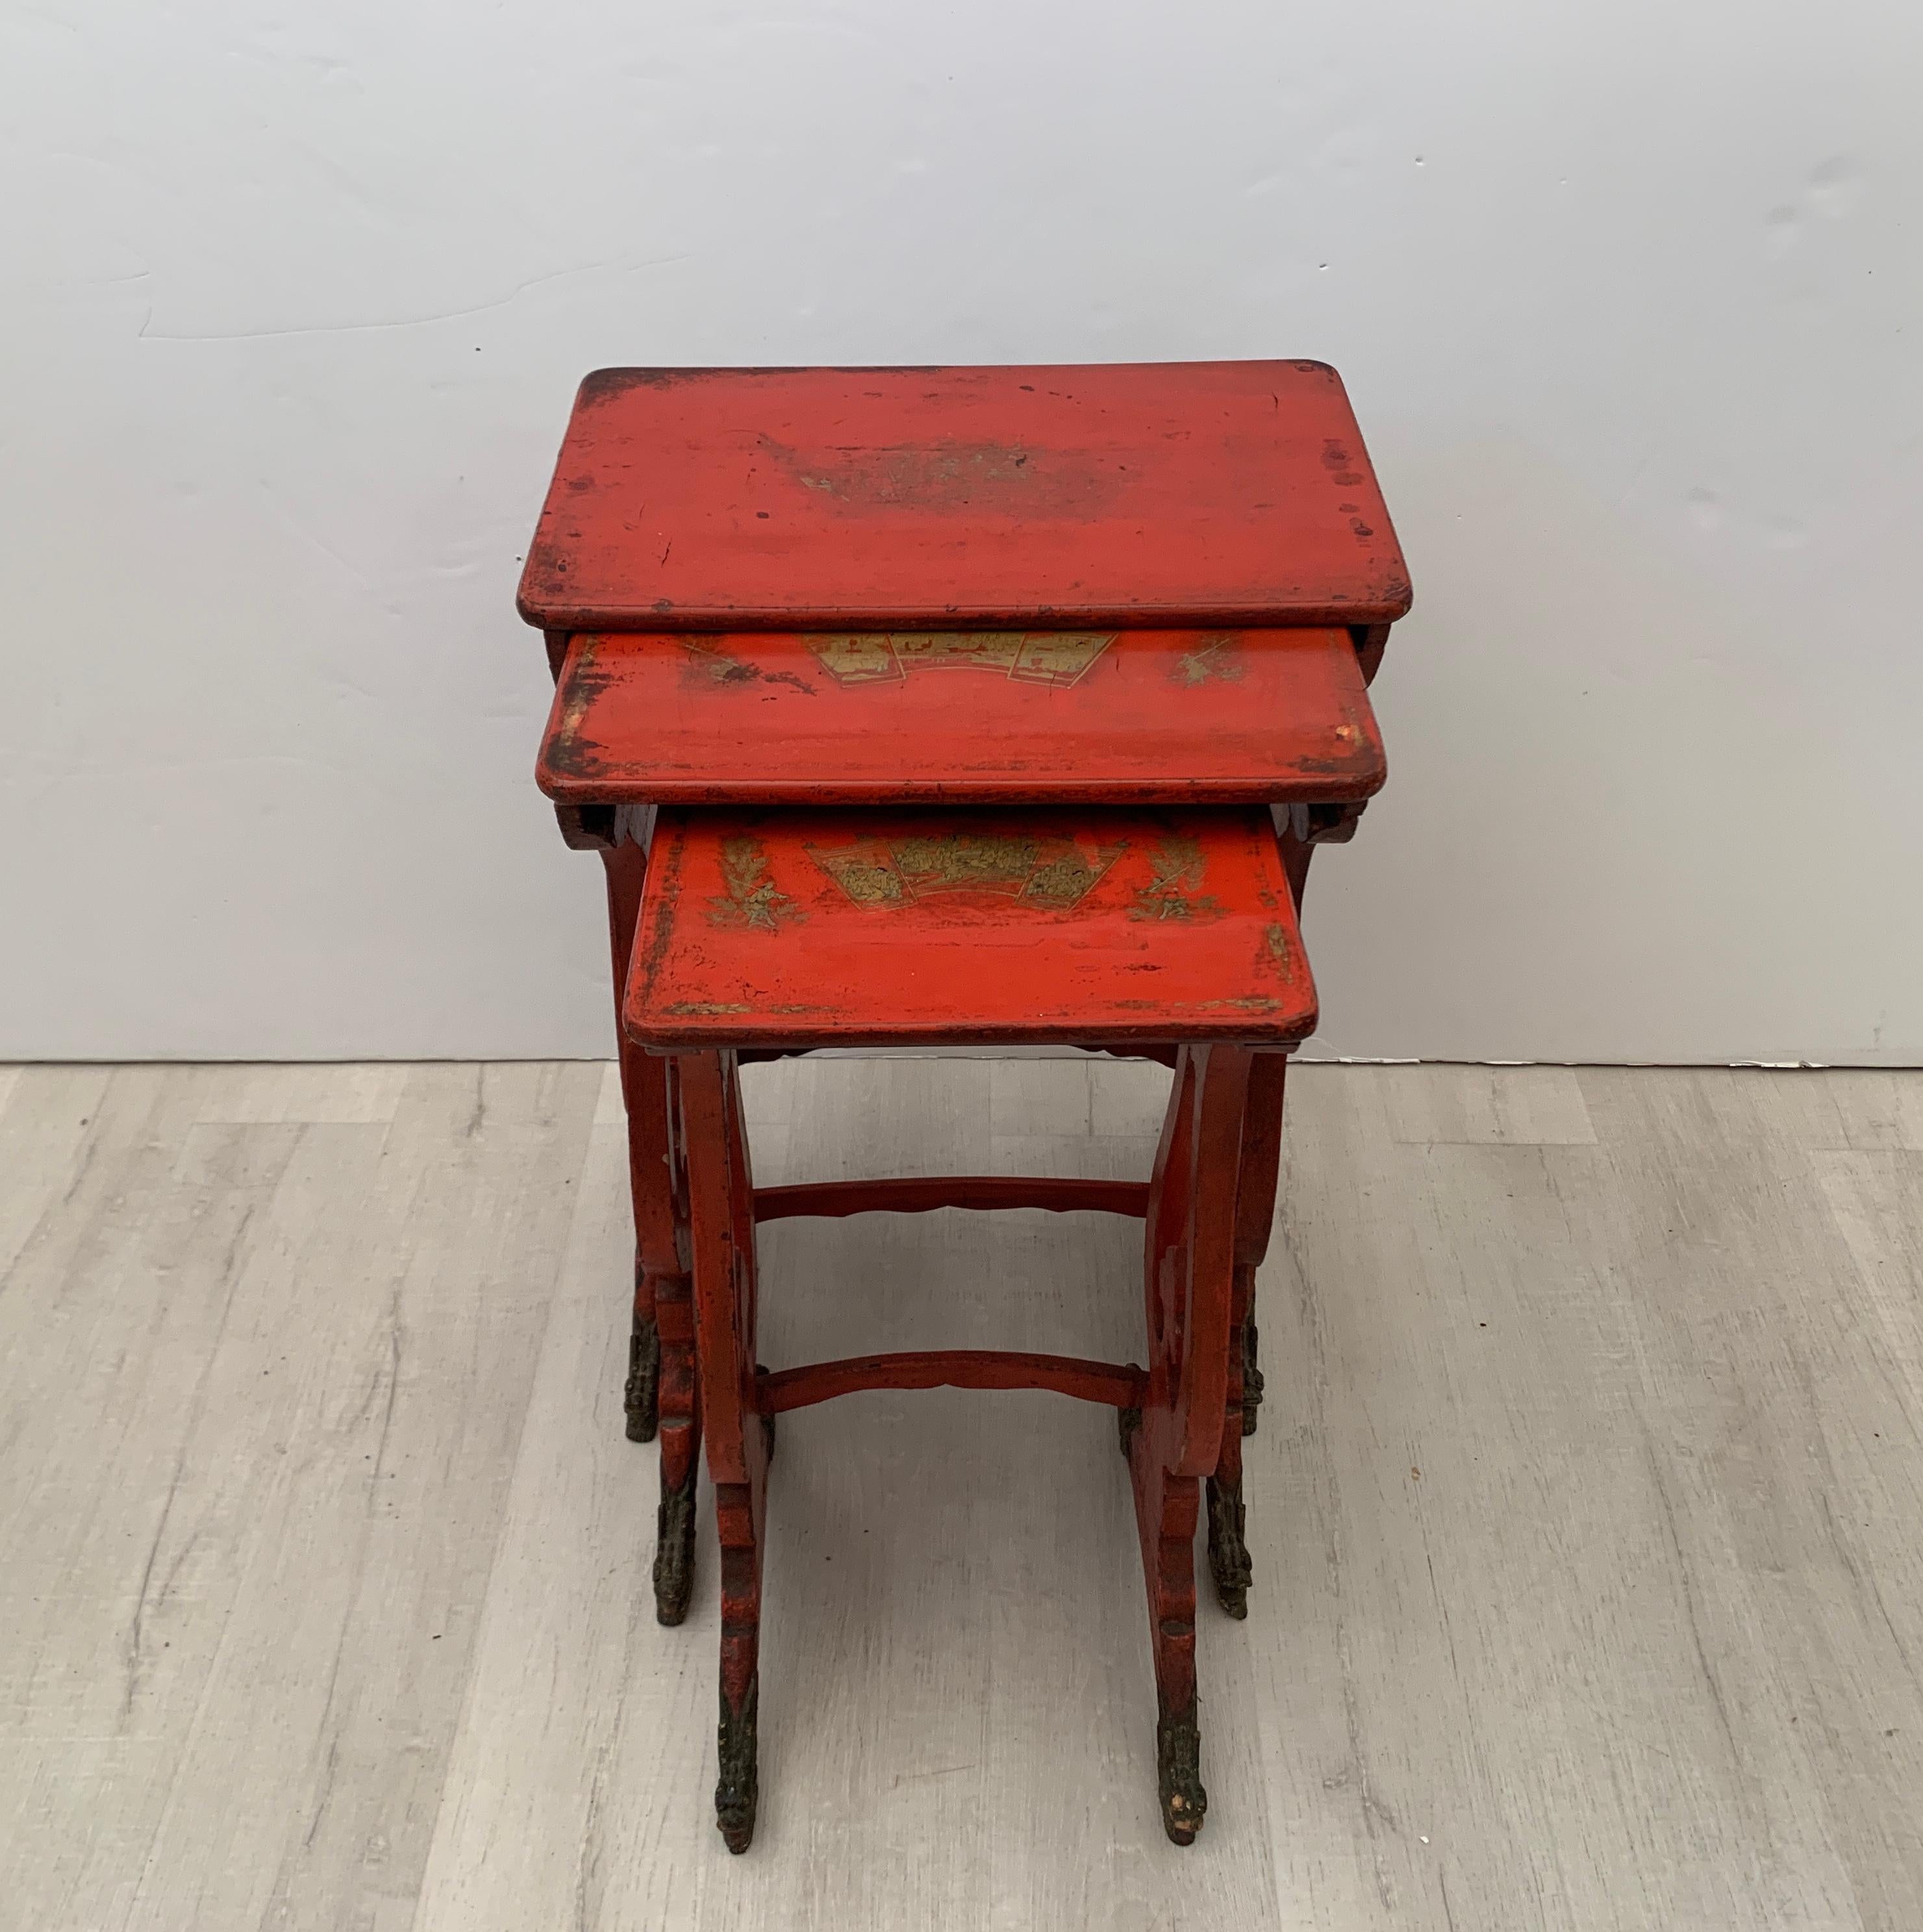 Hand-Carved Chinese Export Red Lacquer and Gilt Nesting Tables, Set of 3, 19th Century